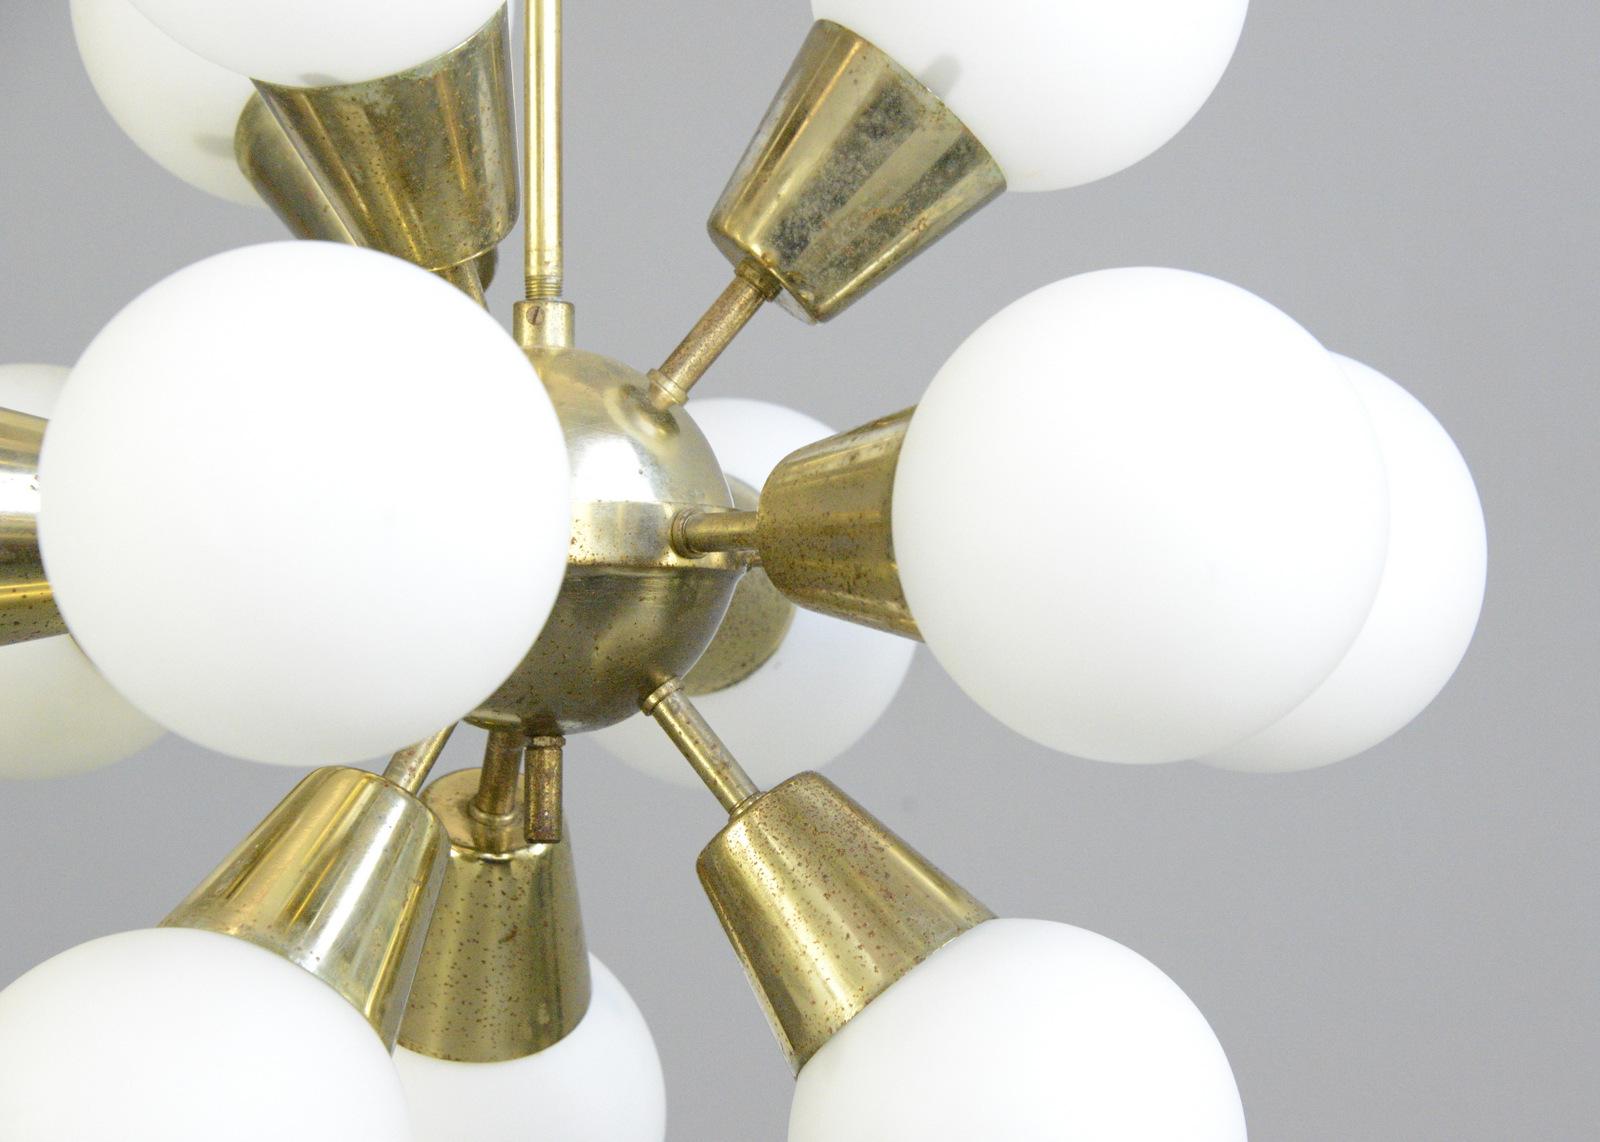 Sputnik pendant light by Kamenicky Senov
-Price is per light, 2 available
- Brass body
- 12 glass balls
- Takes E14 screw fit bulbs
- Comes with low energy LED bulbs included
- Re wired with modern electrical components
- Czech ~ 1960s
- 52cm wide x